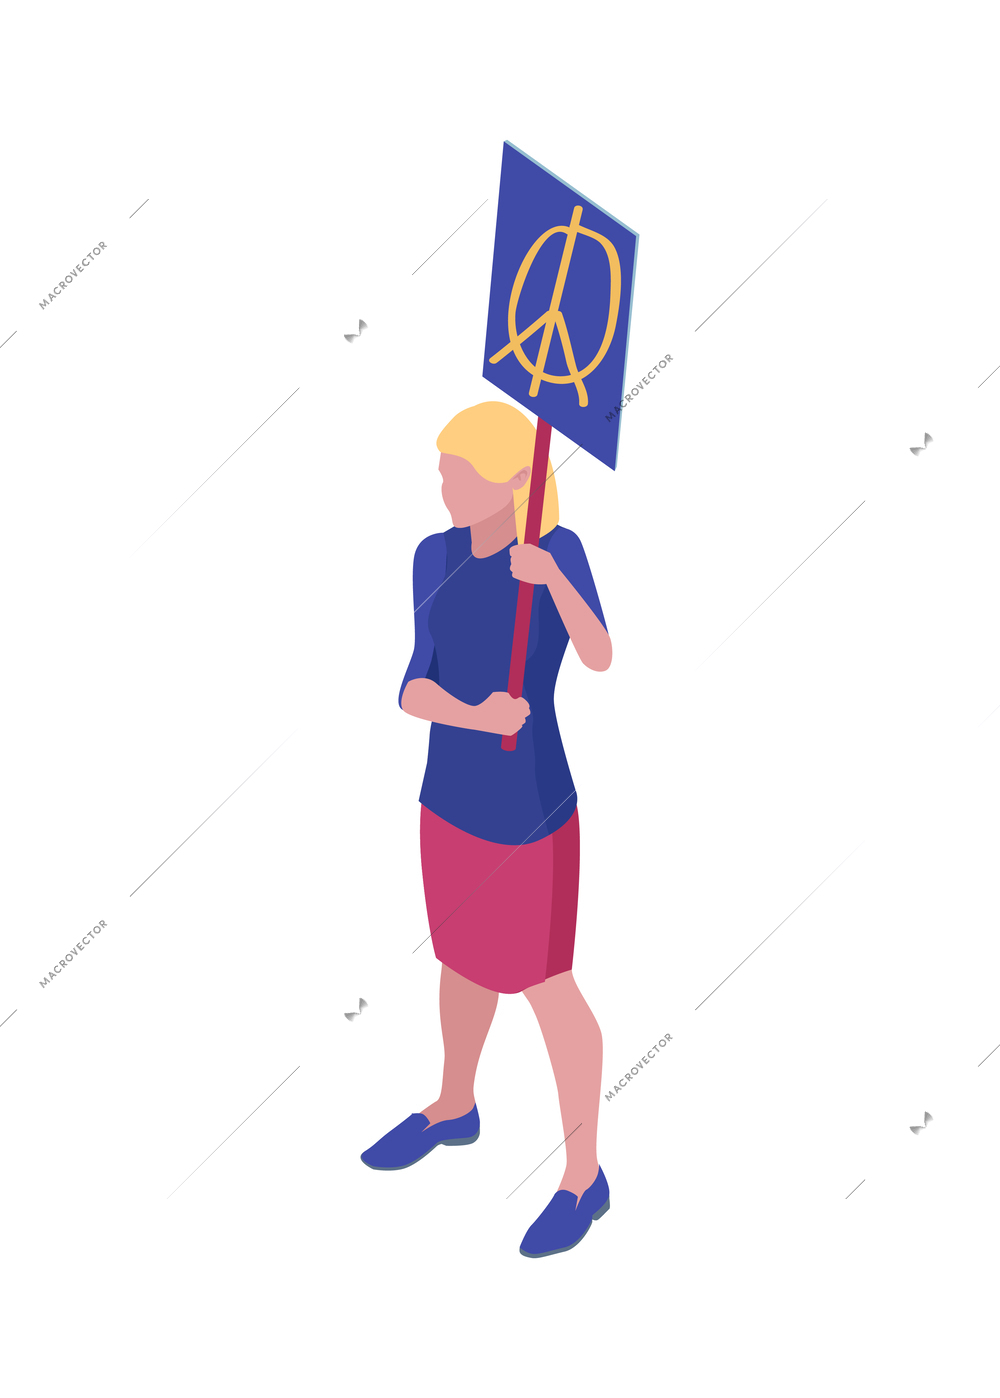 Isometric protesting woman holding placard with peace sign vector illustration